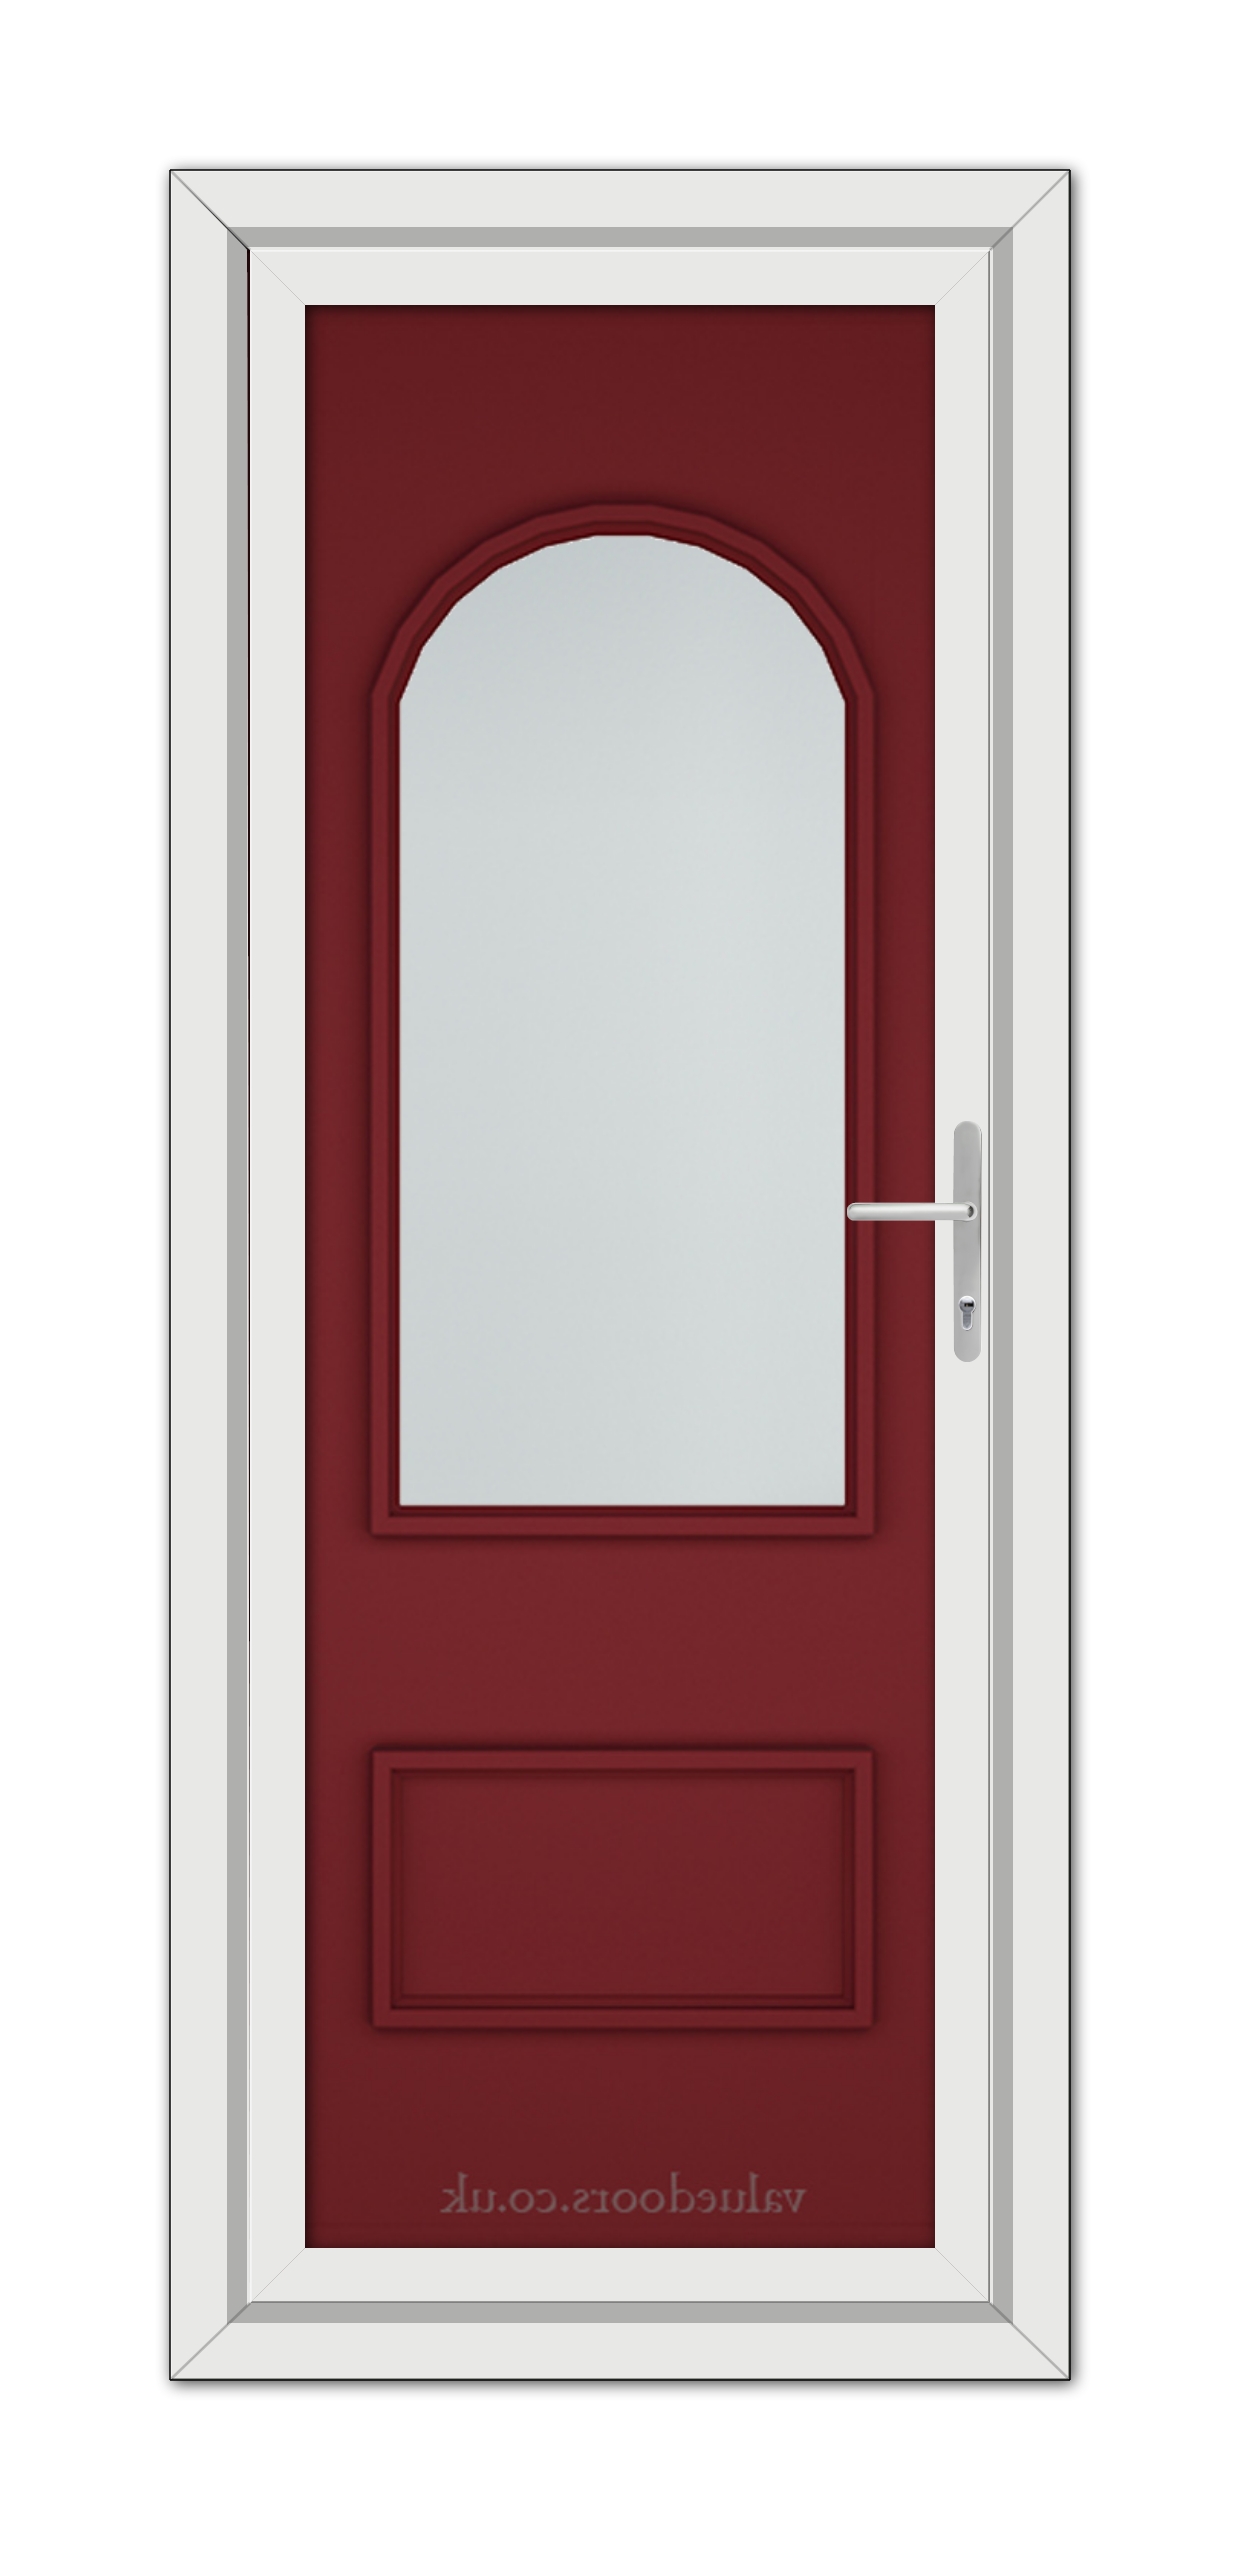 Red Rockingham uPVC Door with a white frame.